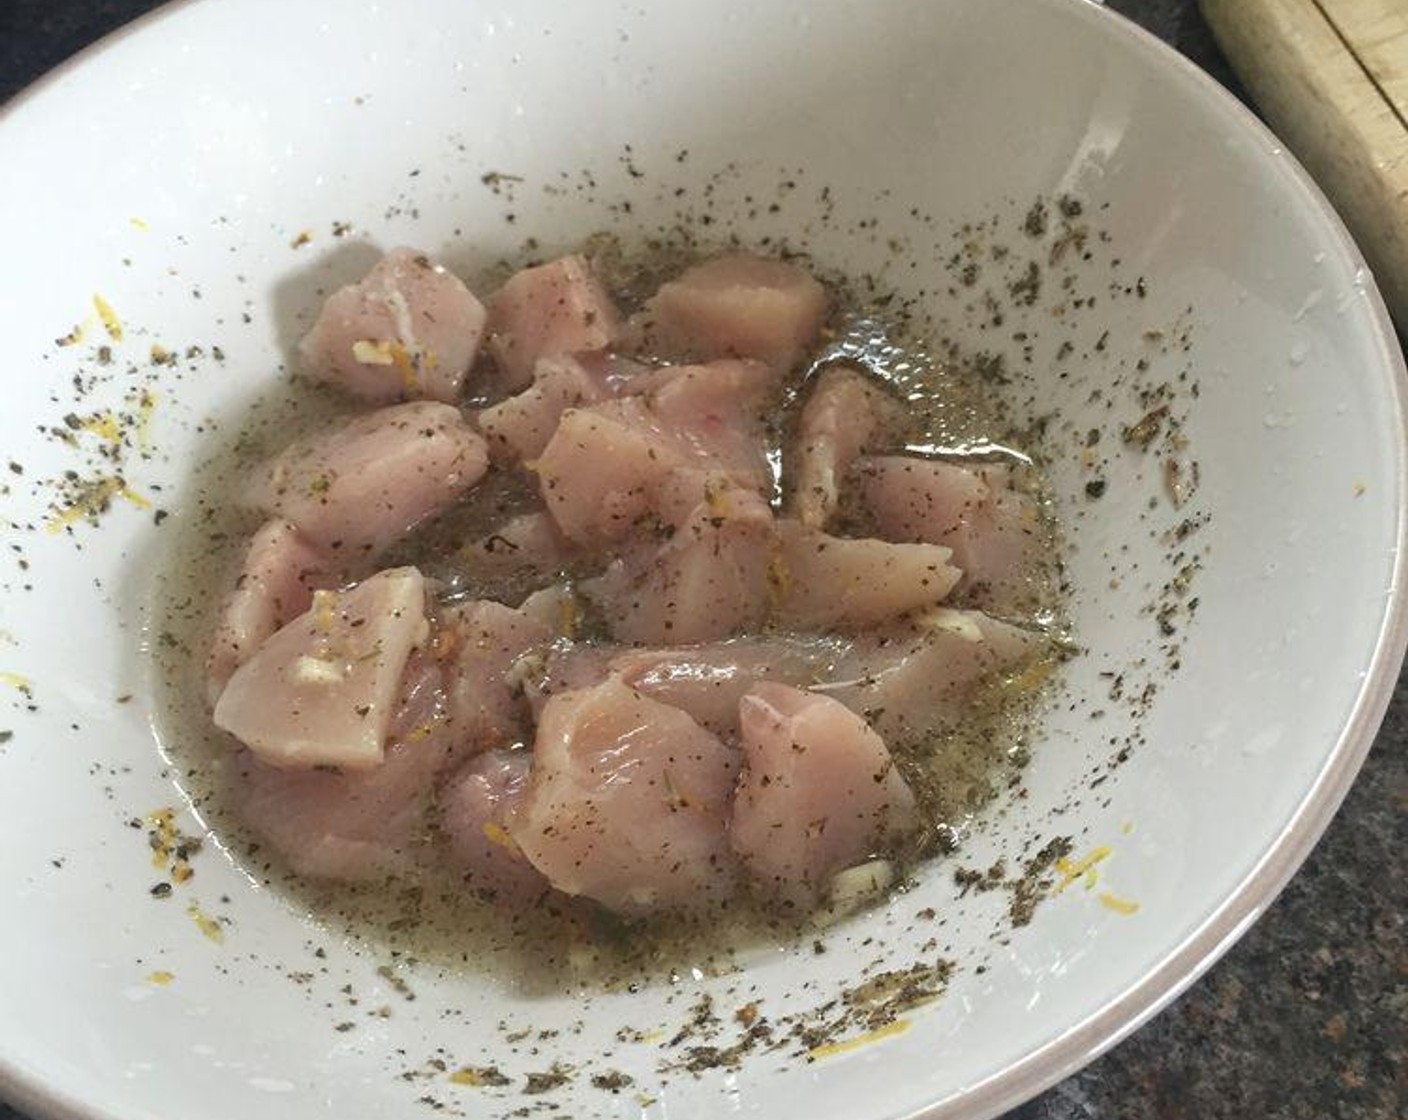 step 2 In a large bowl, mix lemon juice and zest, Olive Oil (1 tsp), Dried Oregano (1 tsp), Salt (1/2 tsp), and Dried Thyme (1/2 tsp). Place the Chicken Breast (1) in the bowl and marinate for 30 minutes or so.